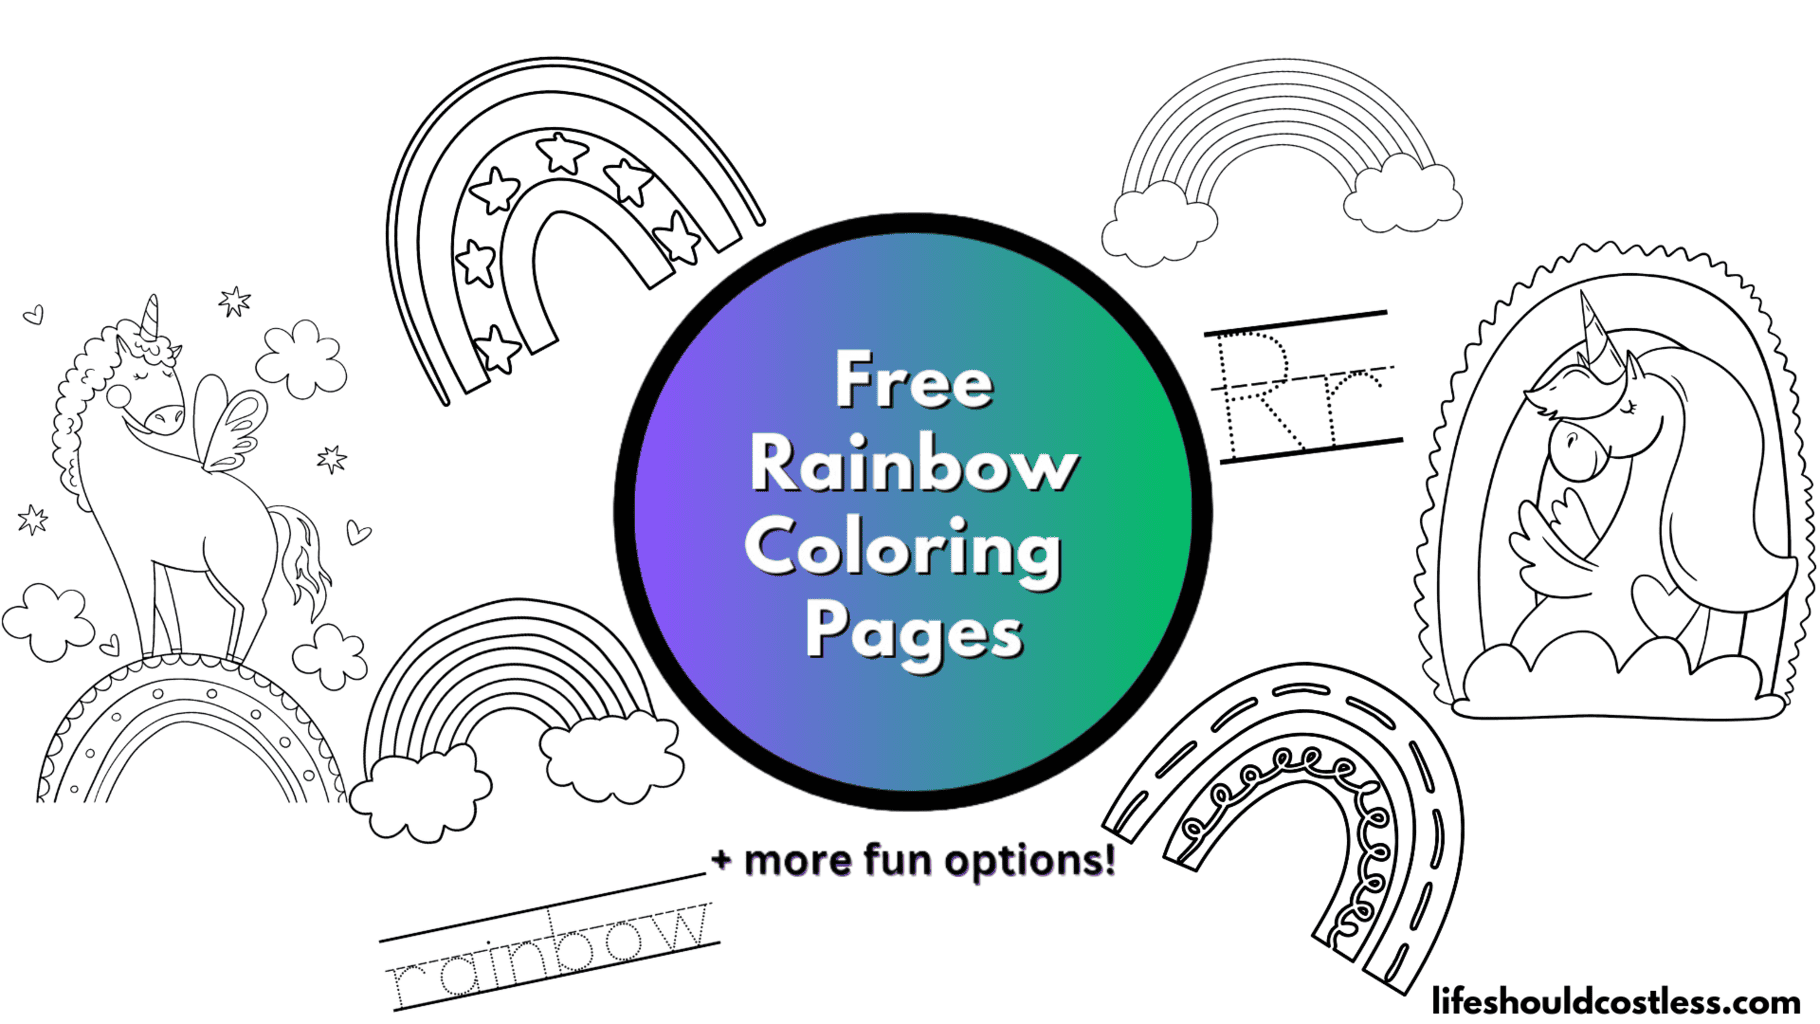 Rainbow Friends Orange Coloring Pages - Free Printable Coloring Pages